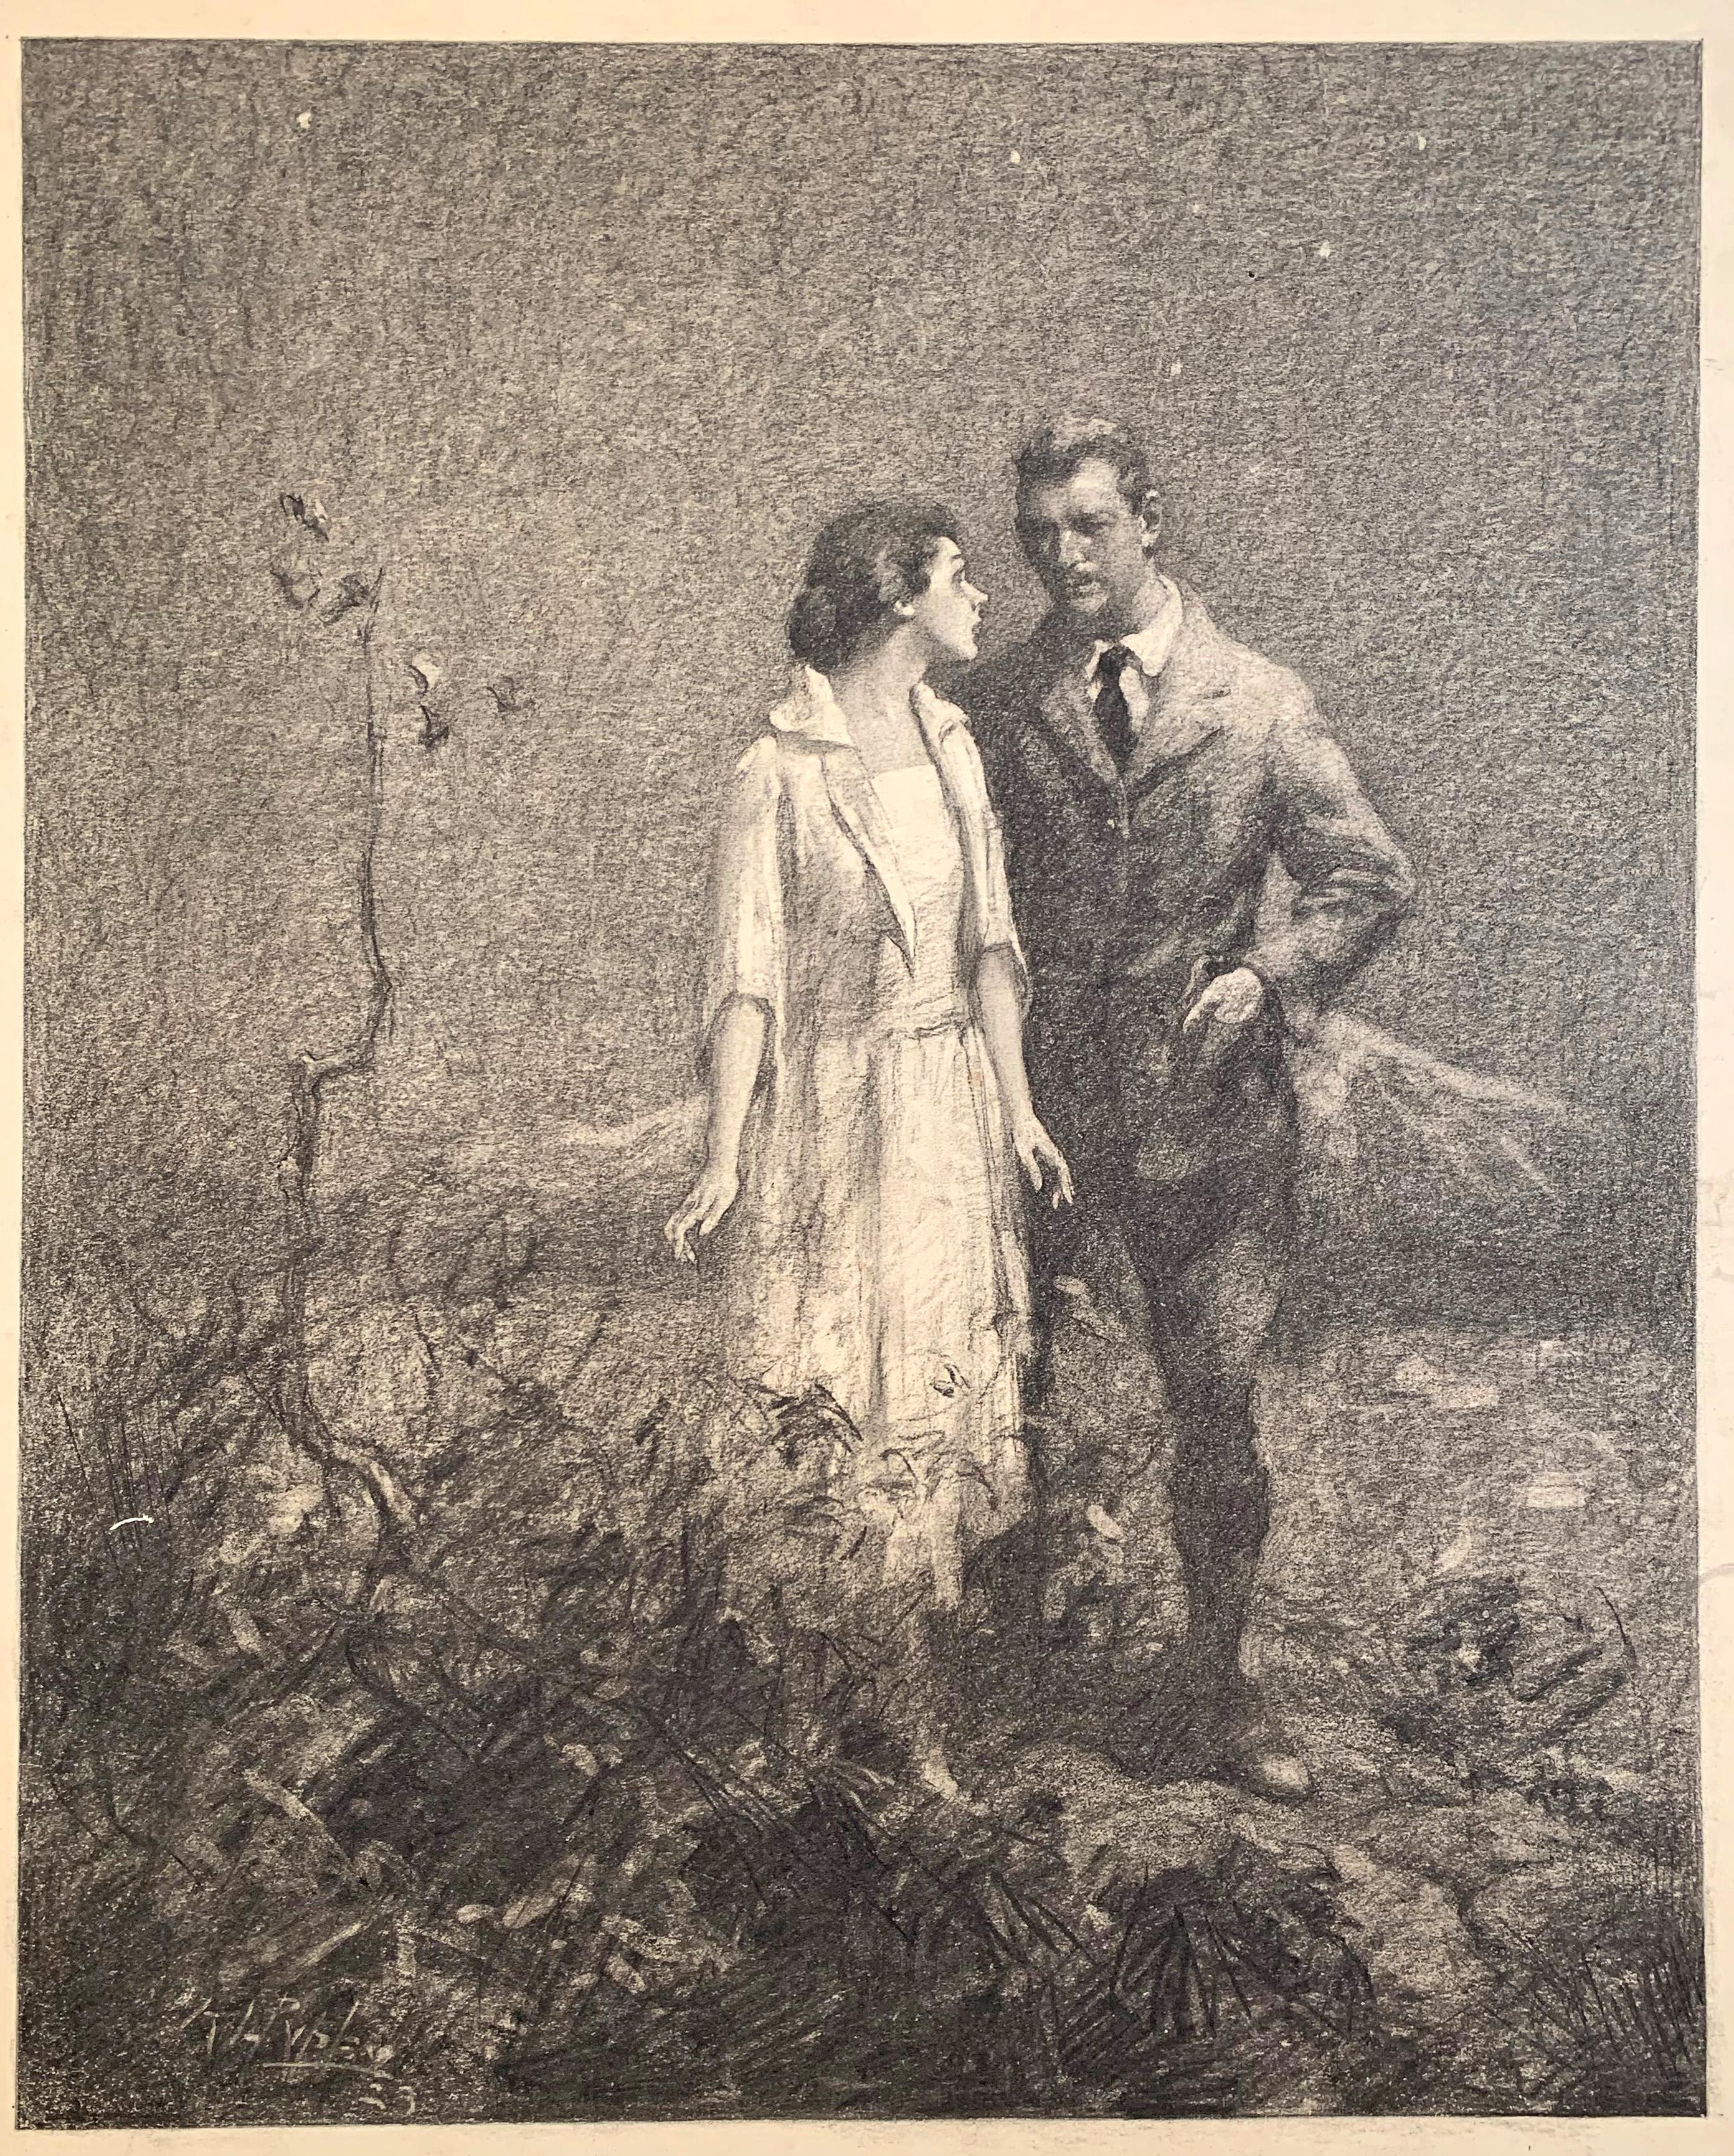 Although Aiden Lassell Ripley, a prominent Boston artist, was best known for his wildlife subjects, he was also an important muralist and illustrator earlier in his career. This charcoal drawing was made to illustrate a story in Modern Priscilla